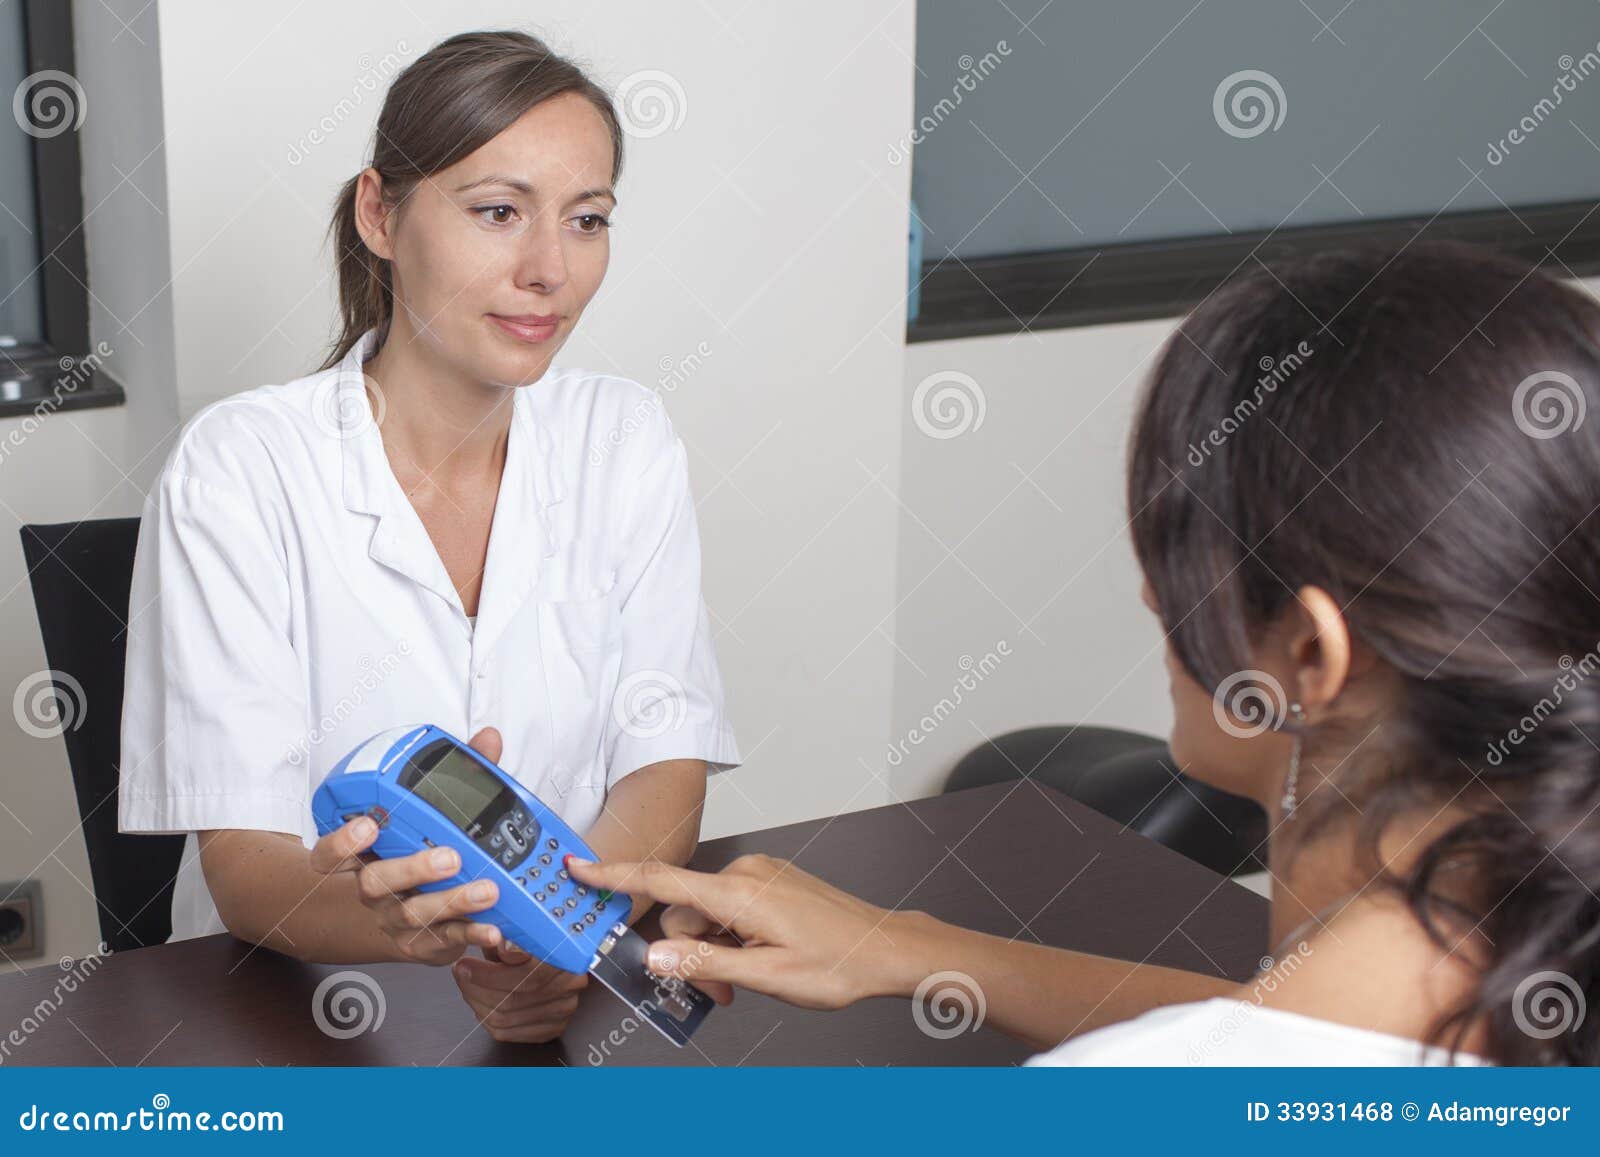 woman paying the doctor with creditcard